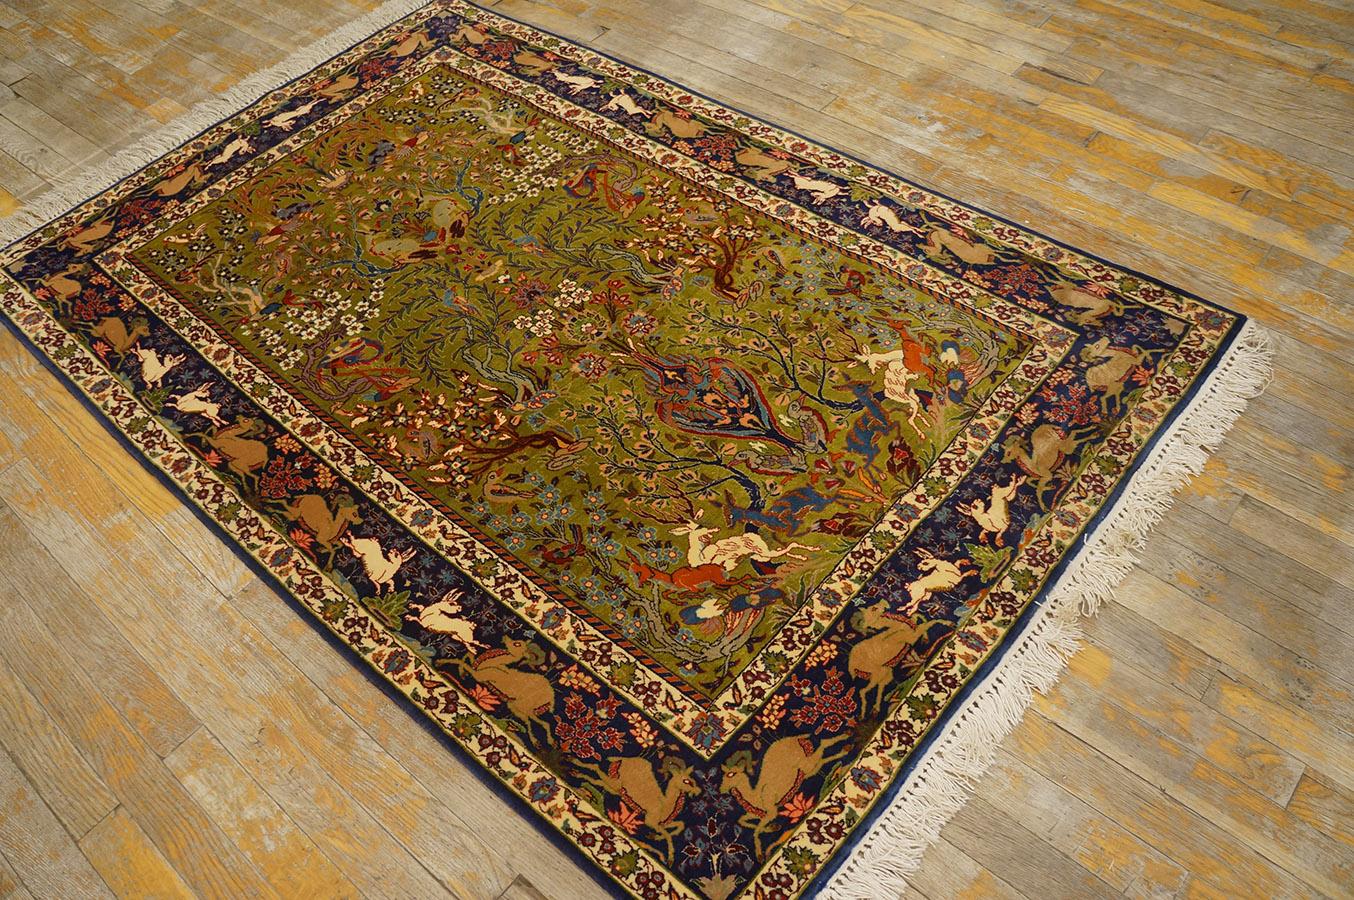 Hand-Knotted Mid 20th Century Persian Isfahan Carpet ( 3' 6'' x 5' 4'' - 107 x 163 cm) For Sale